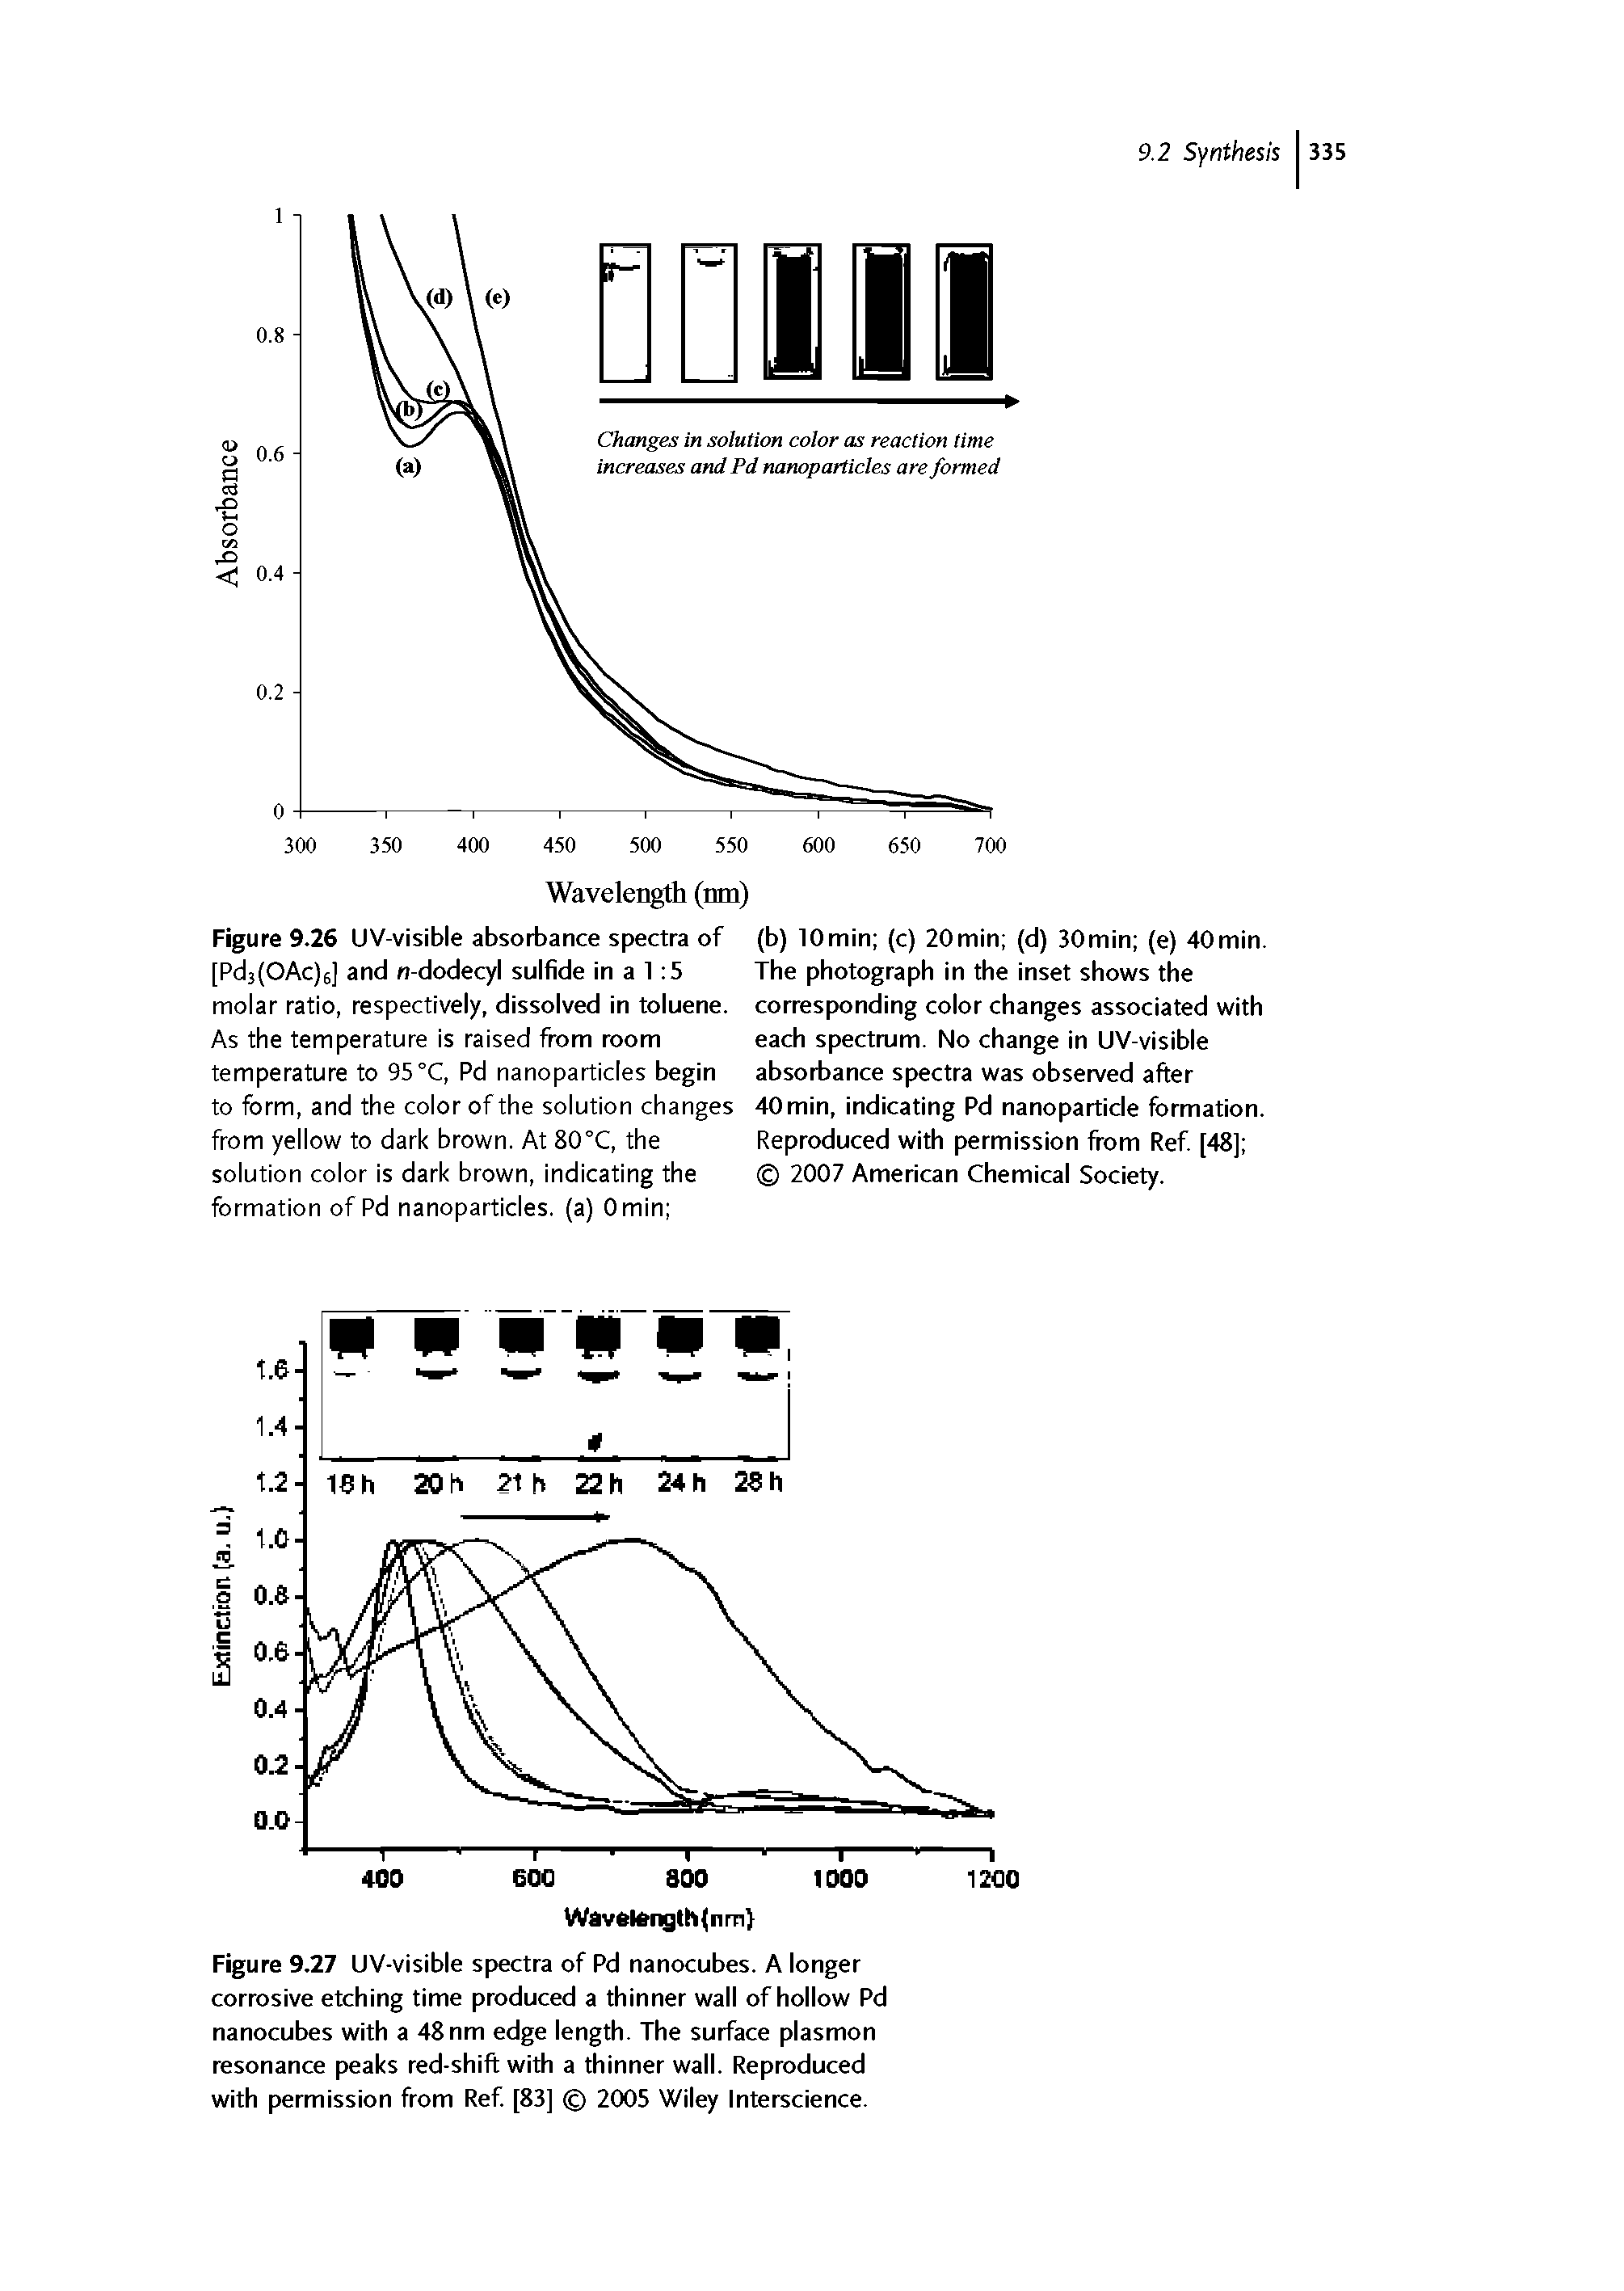 Figure 9.26 UV-visible absorbance spectra of [Pd3(OAc)6] and n-dodecyl sulfide in a 1 5 molar ratio, respectively, dissolved in toluene. As the temperature is raised from room temperature to 95 °C, Pd nanoparticles begin to form, and the color of the solution changes from yellow to dark brown. At SOX, the solution color Is dark brown, indicating the formation of Pd nanoparticles, (a) Omin ...